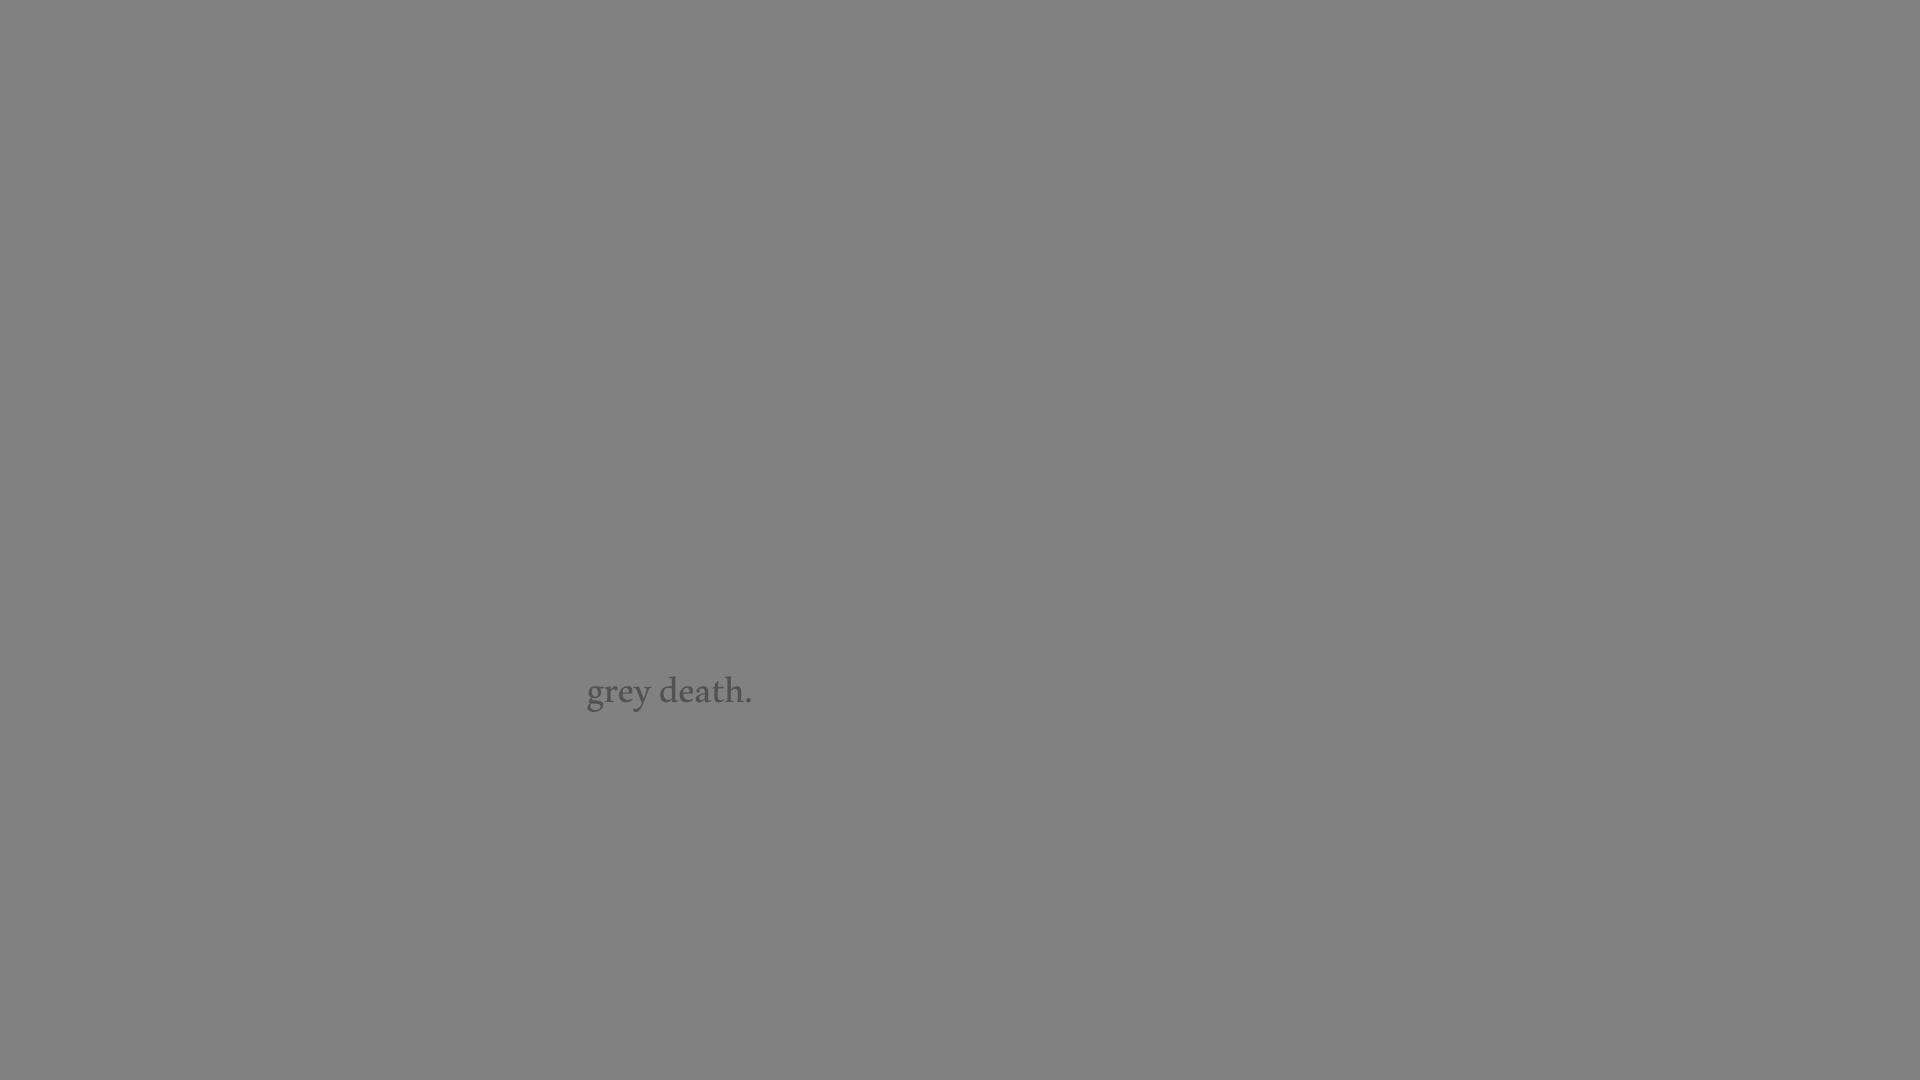 General 1920x1080 minimalism simple background gray background